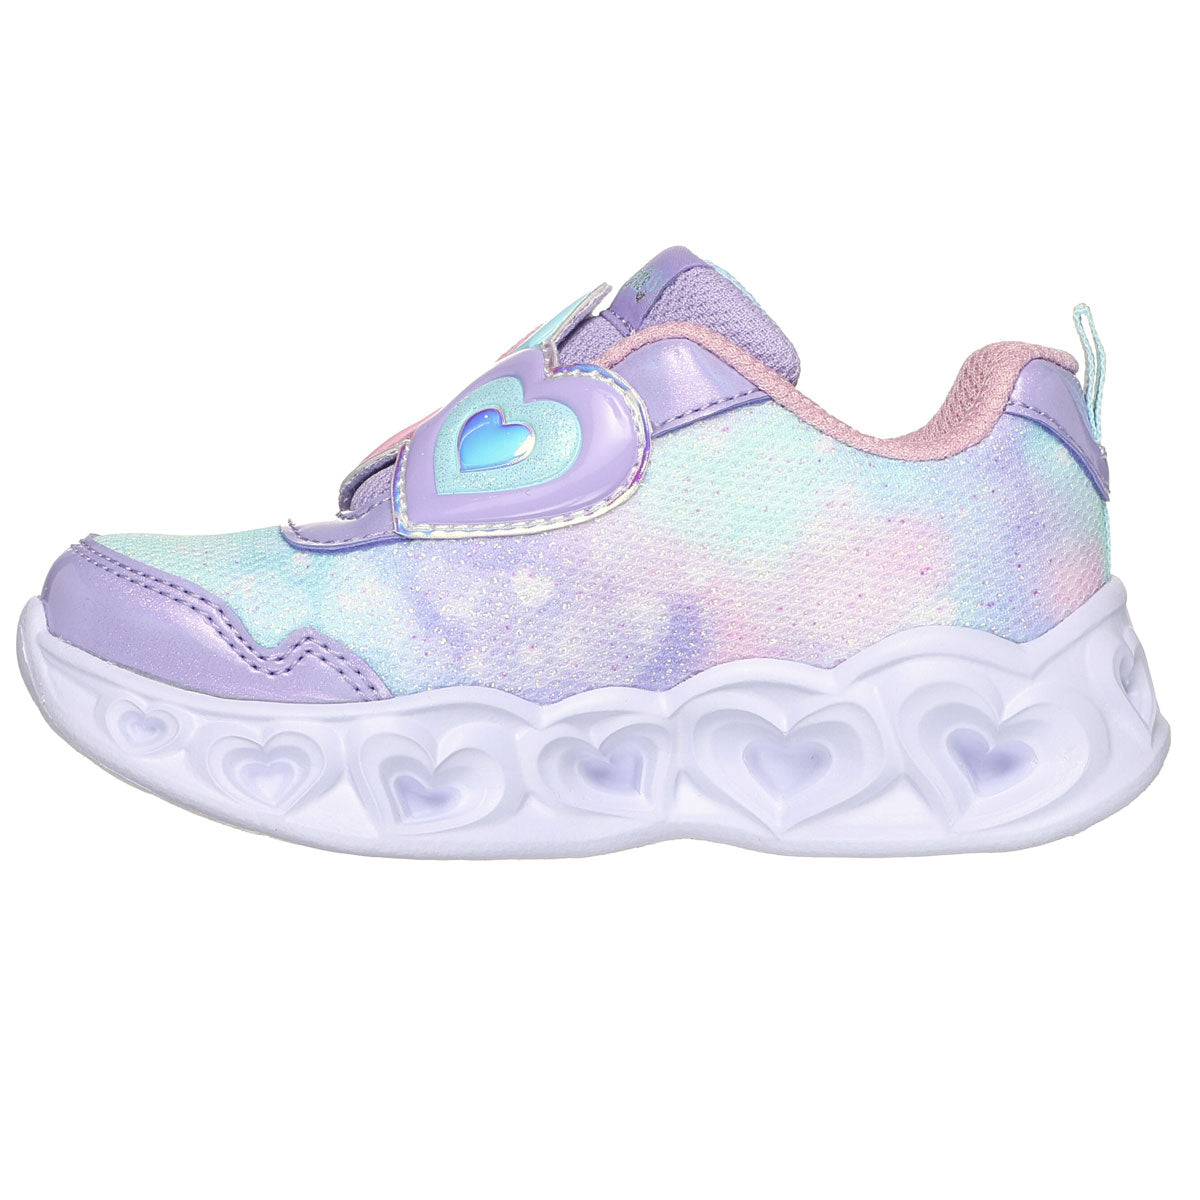 Skechers Heart Lights Trainers - Girls - Lilac/Pink/Blue